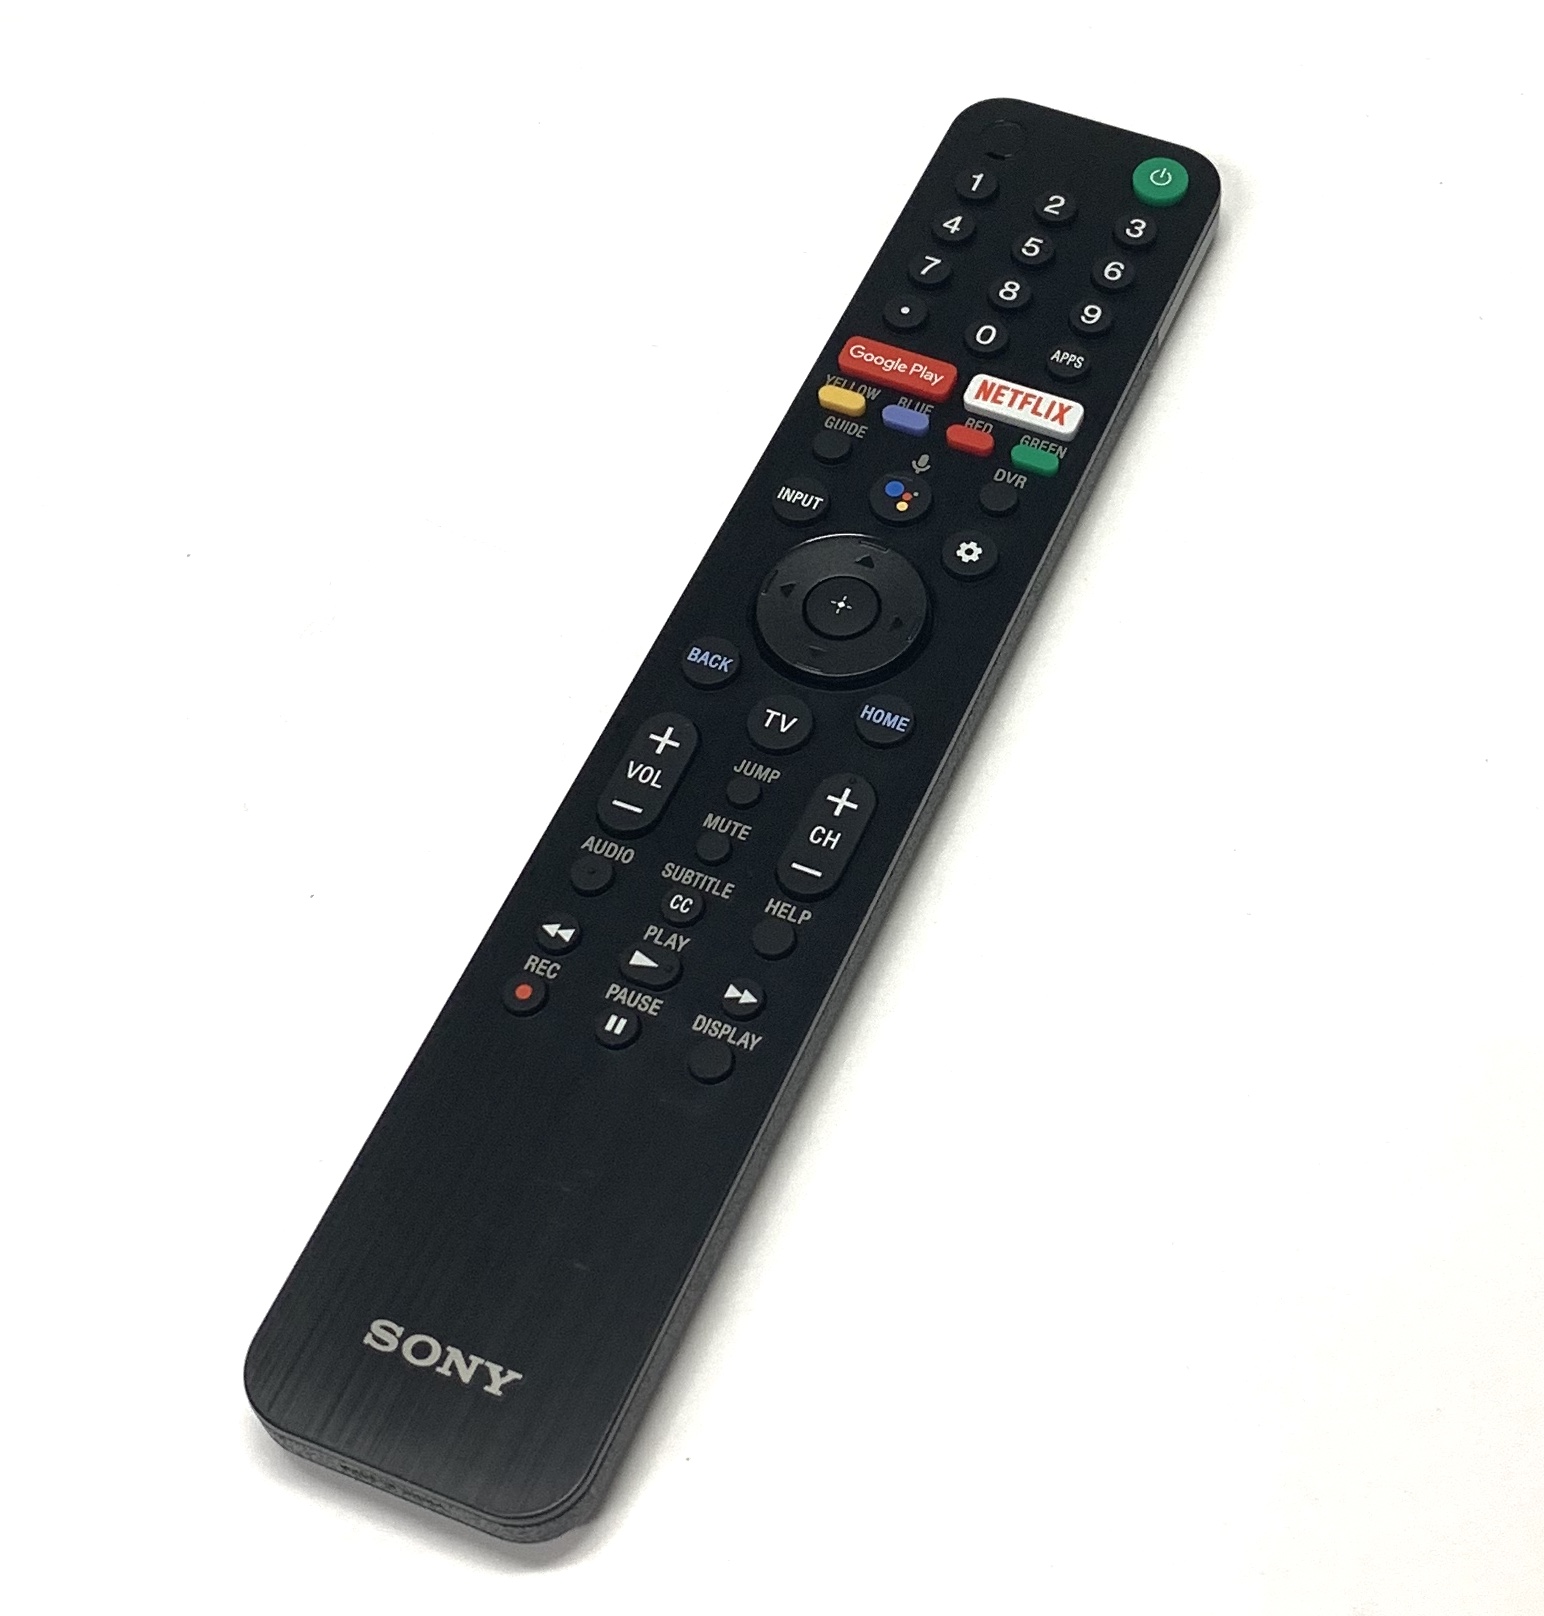 Sony OEM Sony Remote Control Specifically For XBR-75X857D, XBR75X900E, XBR-75X900E, XBR75X900F, XBR-75X900F